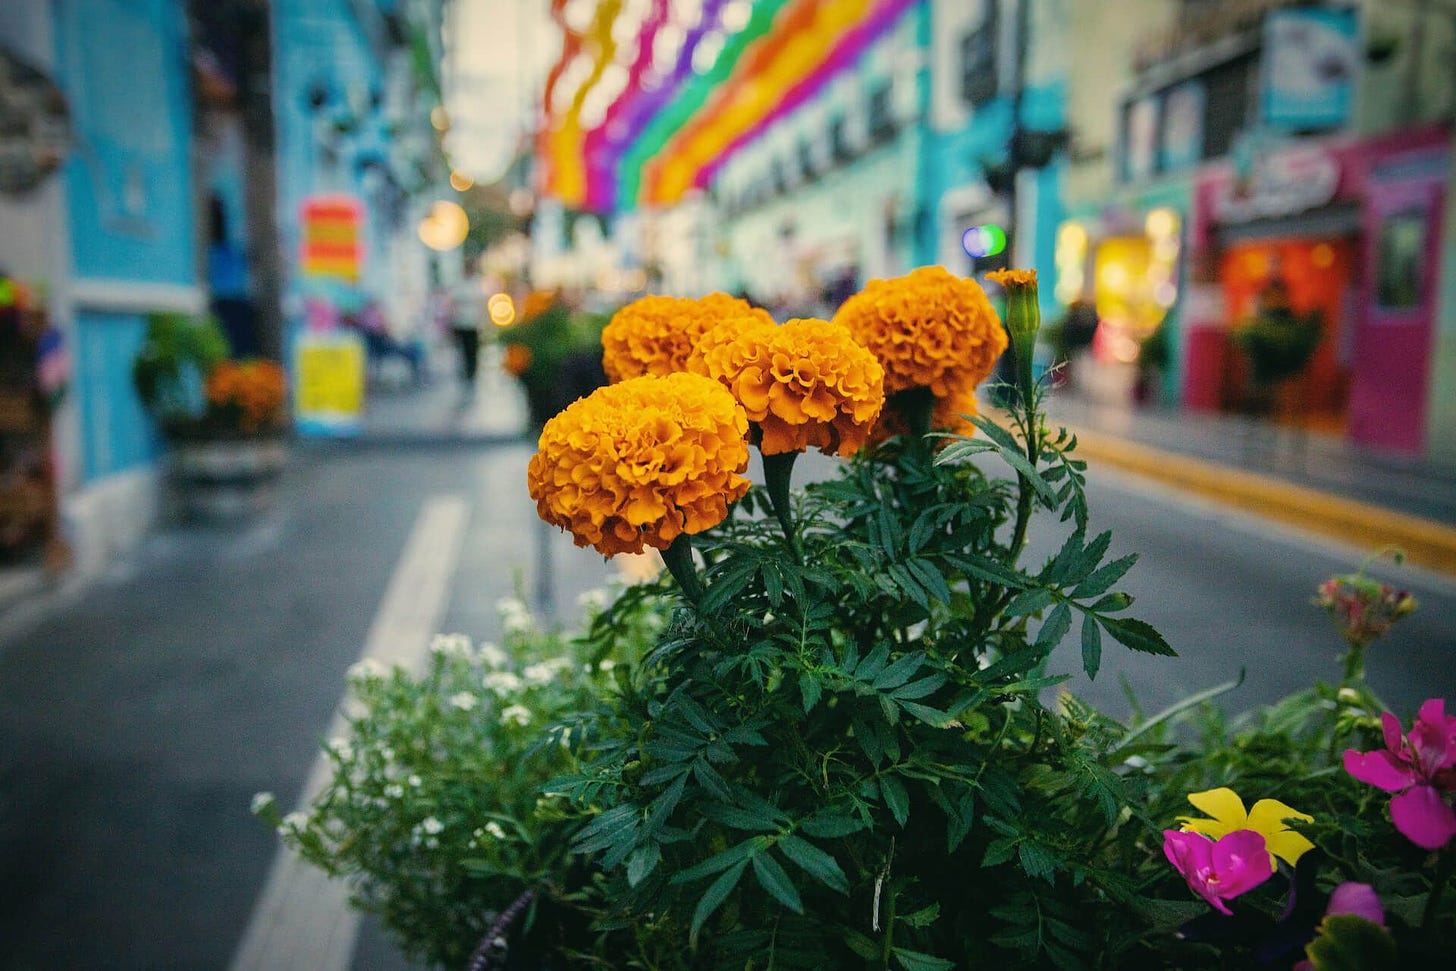 Cempasúchil flowers in boxes on the main street of Atlixco, a town famous for their production. (Photo: Václav Lang)